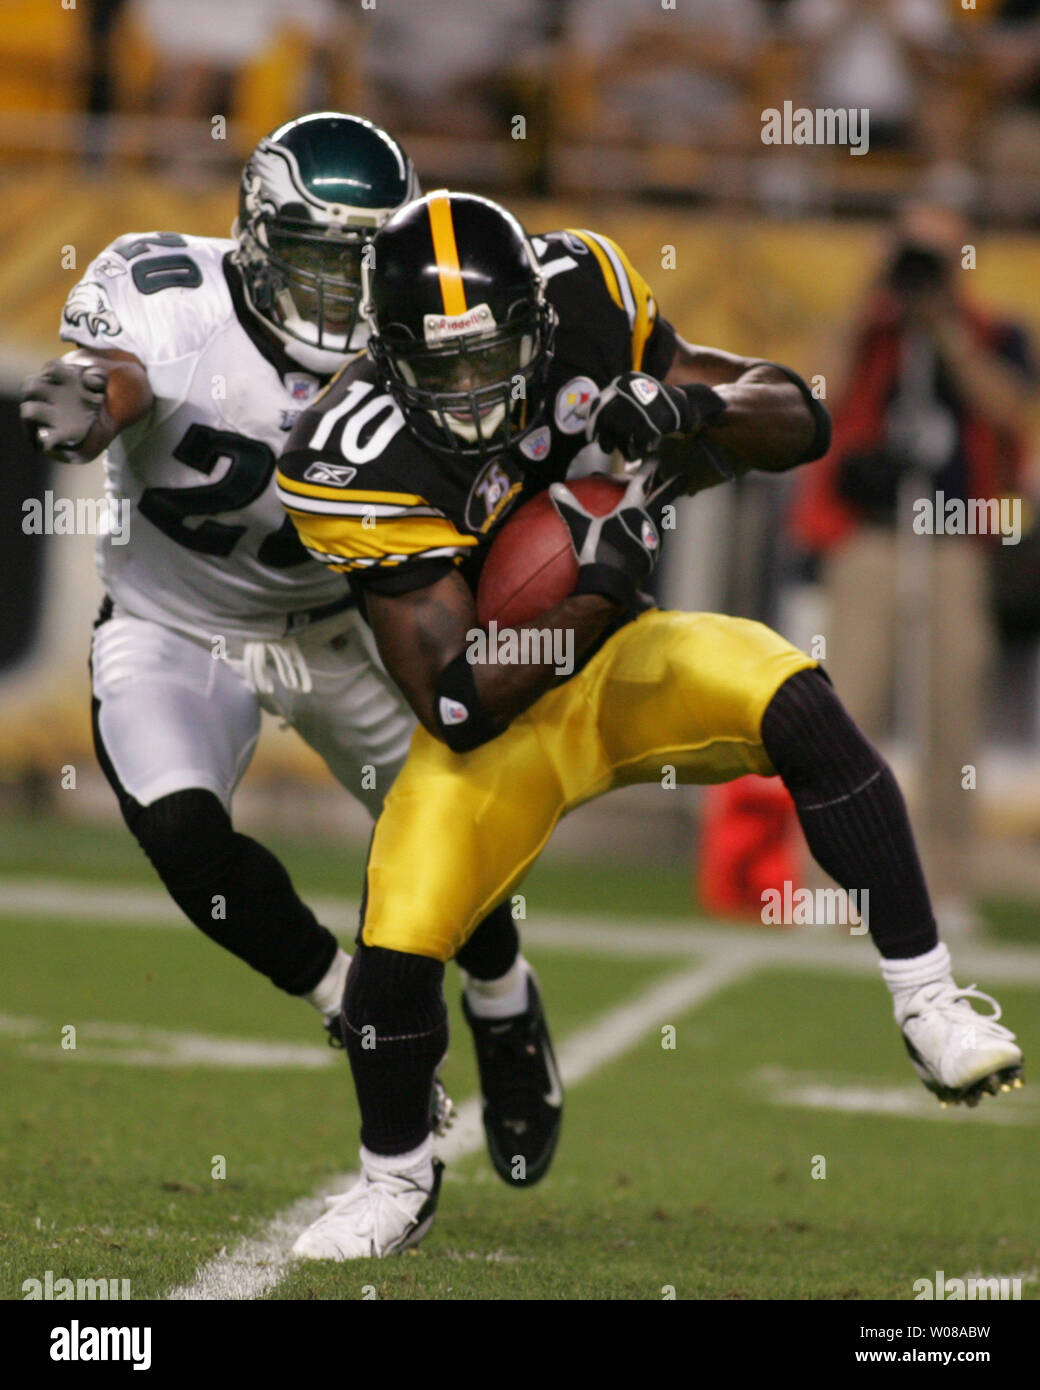 Pittsburgh Steelers Santonio Holmes pulls in a pass from Ben Roethlisberger, and is taken down by Philadelphia Eagles Brian Dawkins during the second quarter at Heinz Field in Pittsburgh, Pennsylvania on August 26, 2007.  (UPI Photo/Stephen Gross) Stock Photo